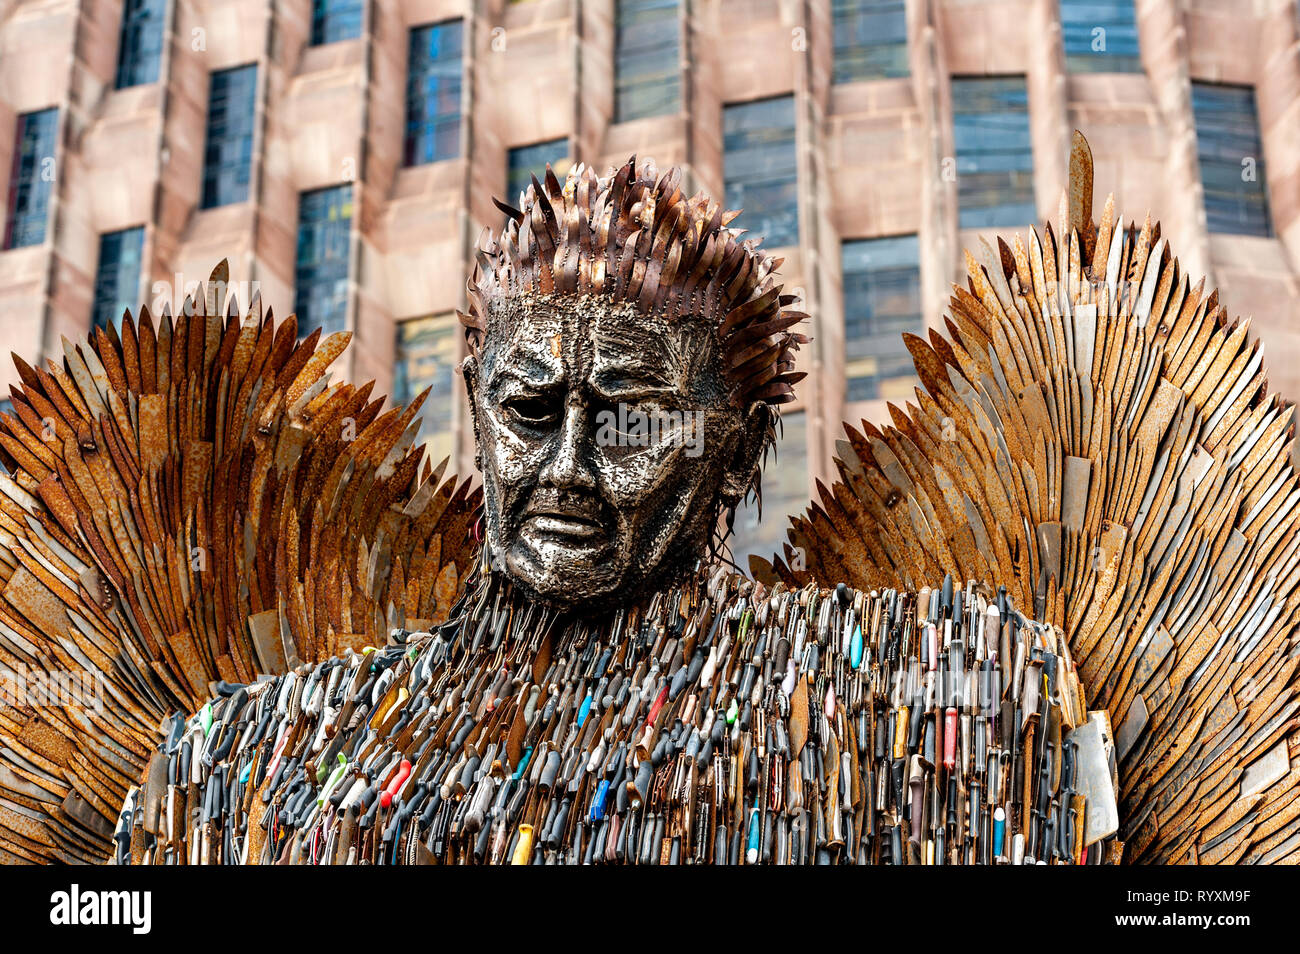 Coventry, West Midlands, UK. 15th March, 2019. The Knife Angel which was installed at Coventry Cathedral yesterday drew big crowds of spectators today.  The country is currently in a grip of knife violence. It is hoped the sculpture will highlight the issue and have a positive effect on the public. Credit: AG News/Alamy Live News. Stock Photo